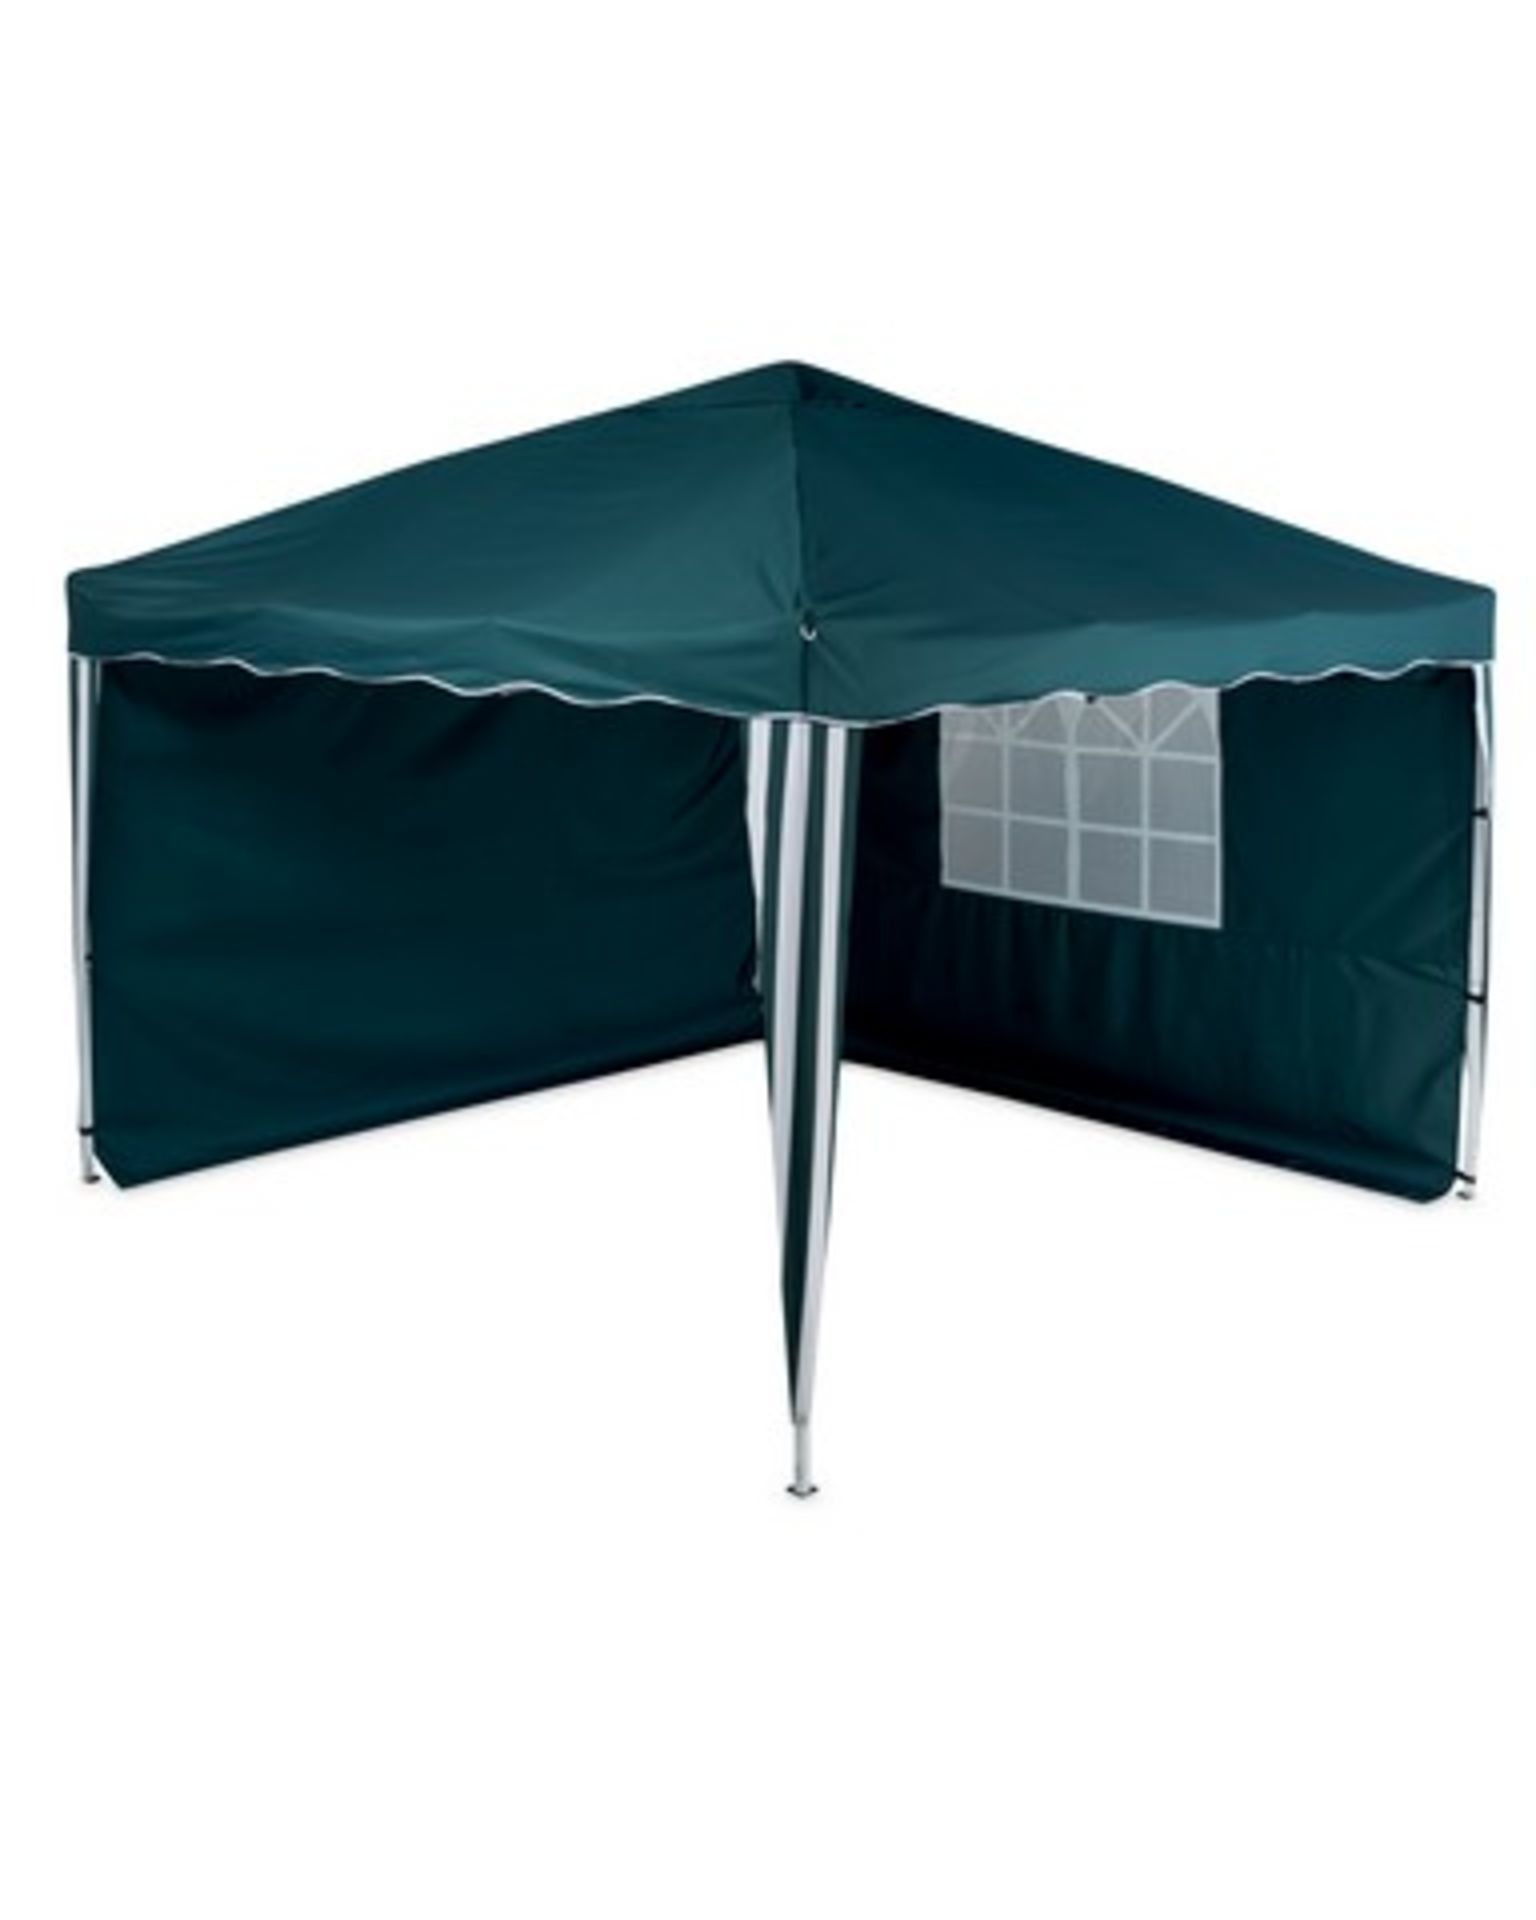 V Brand New Gardenline Twin Pack Gazebo Side Panels-Each Panel Measures Approx 3m x 2m-1 Section